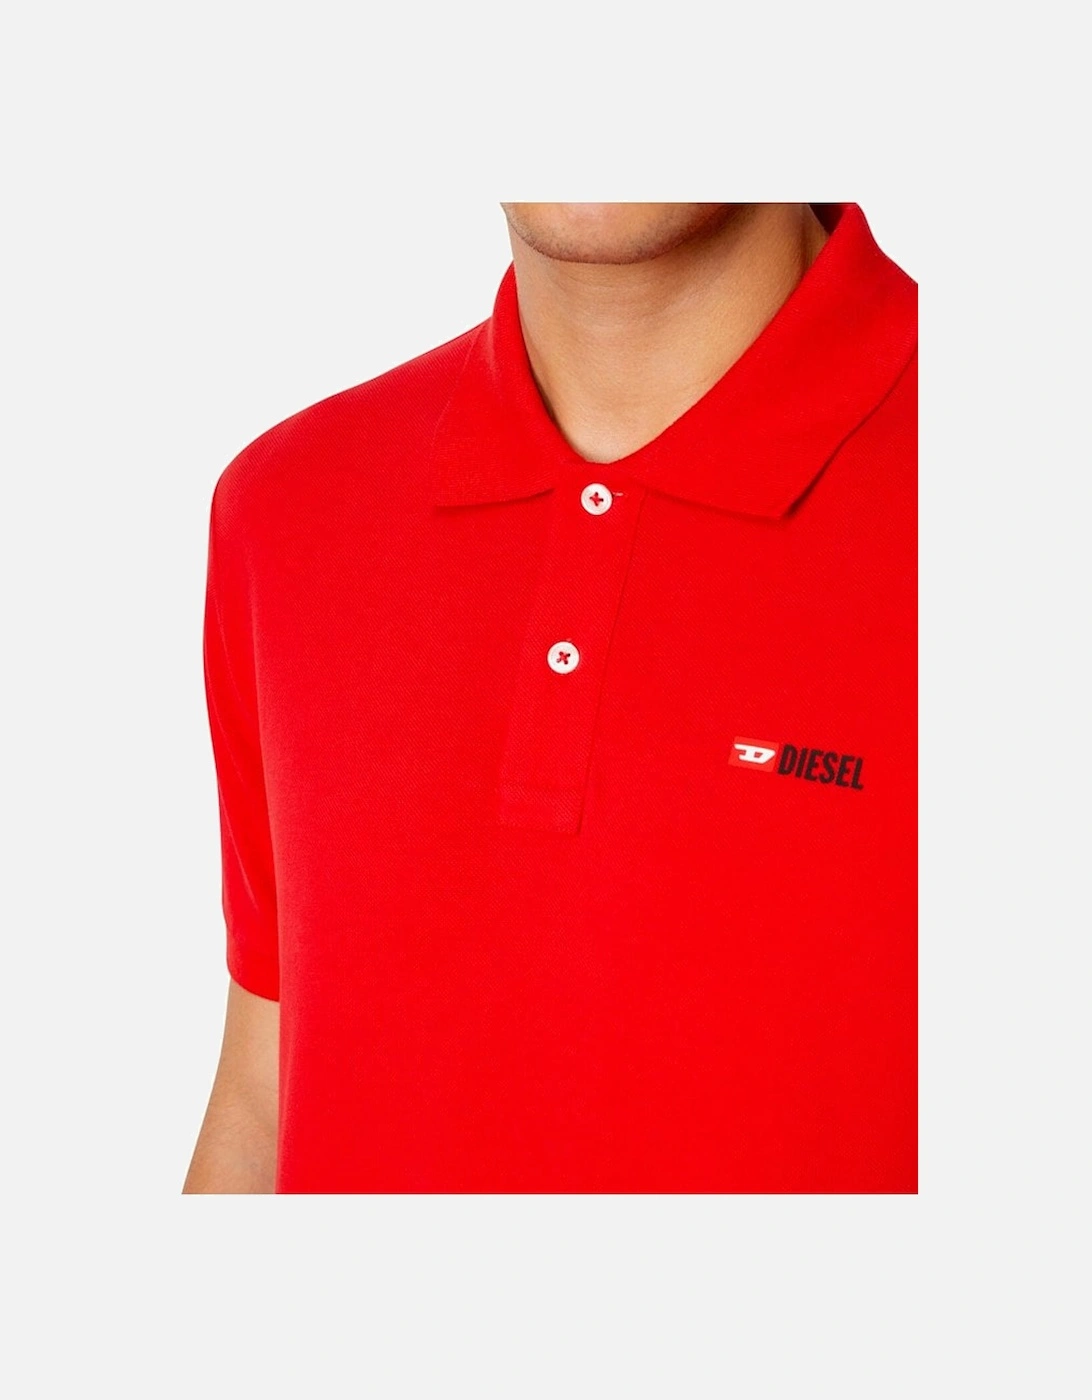 T-smith Division Polo Shirt Red